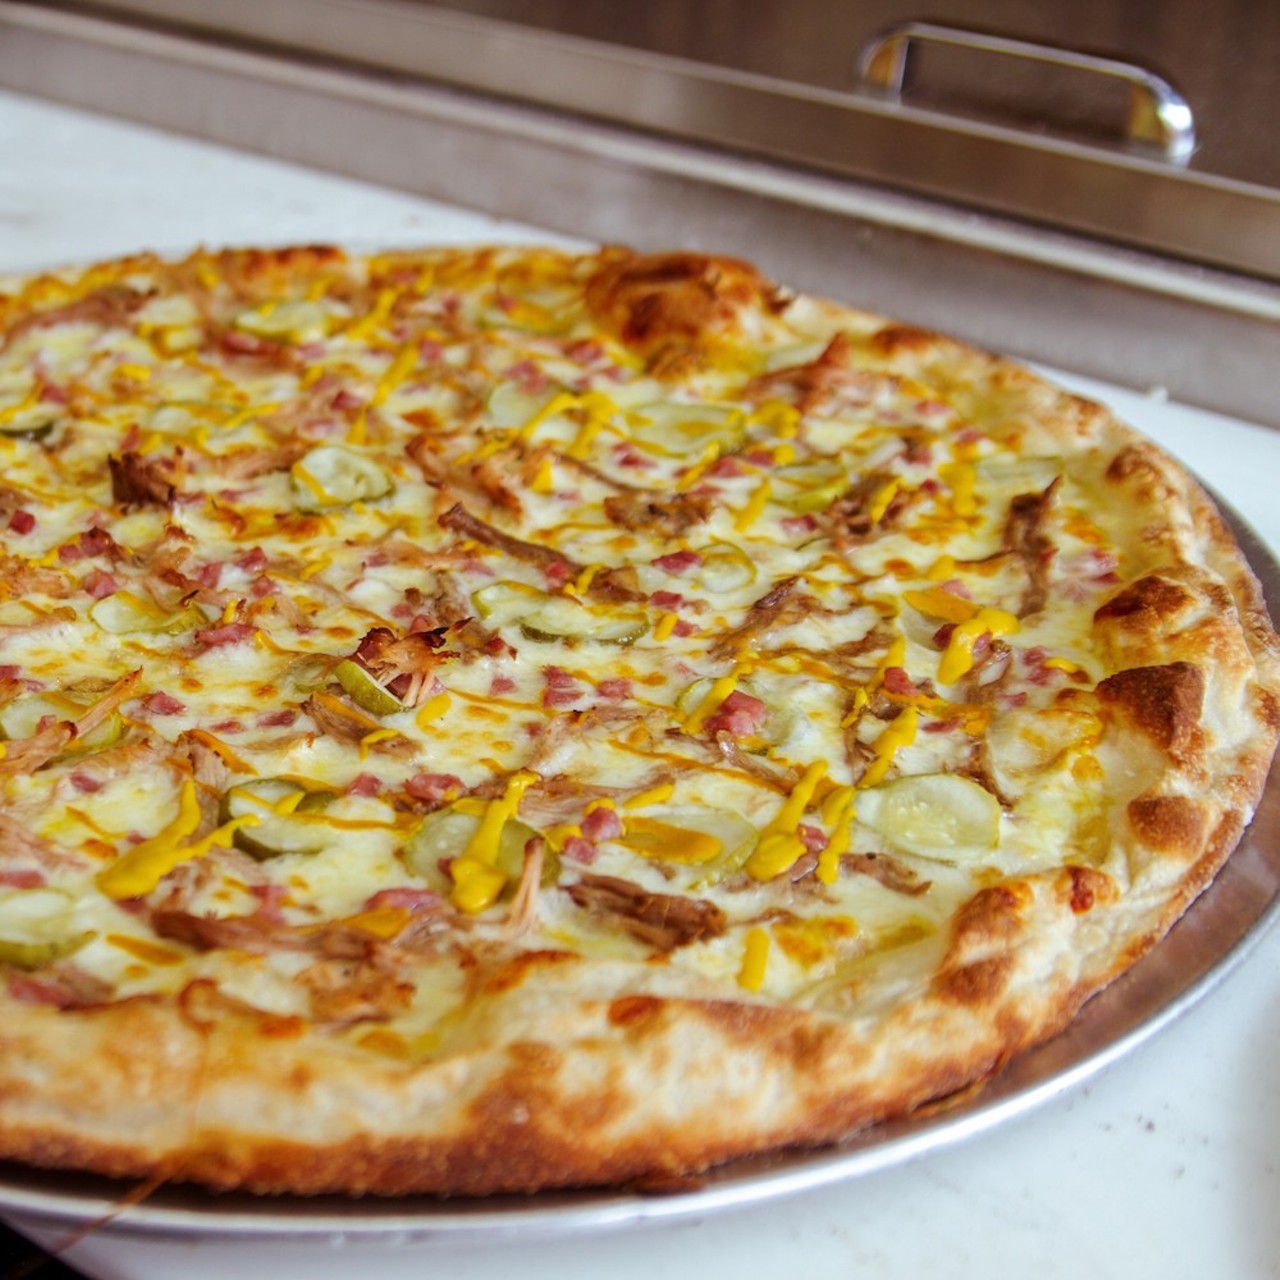 Cuban Pizza
Pizza Emporium tops its Dijonnaise base with a mozzarella and Swiss blend &#151; plus roast pork, ham and pickles &#151; to present an oh-so-Tampa pie.